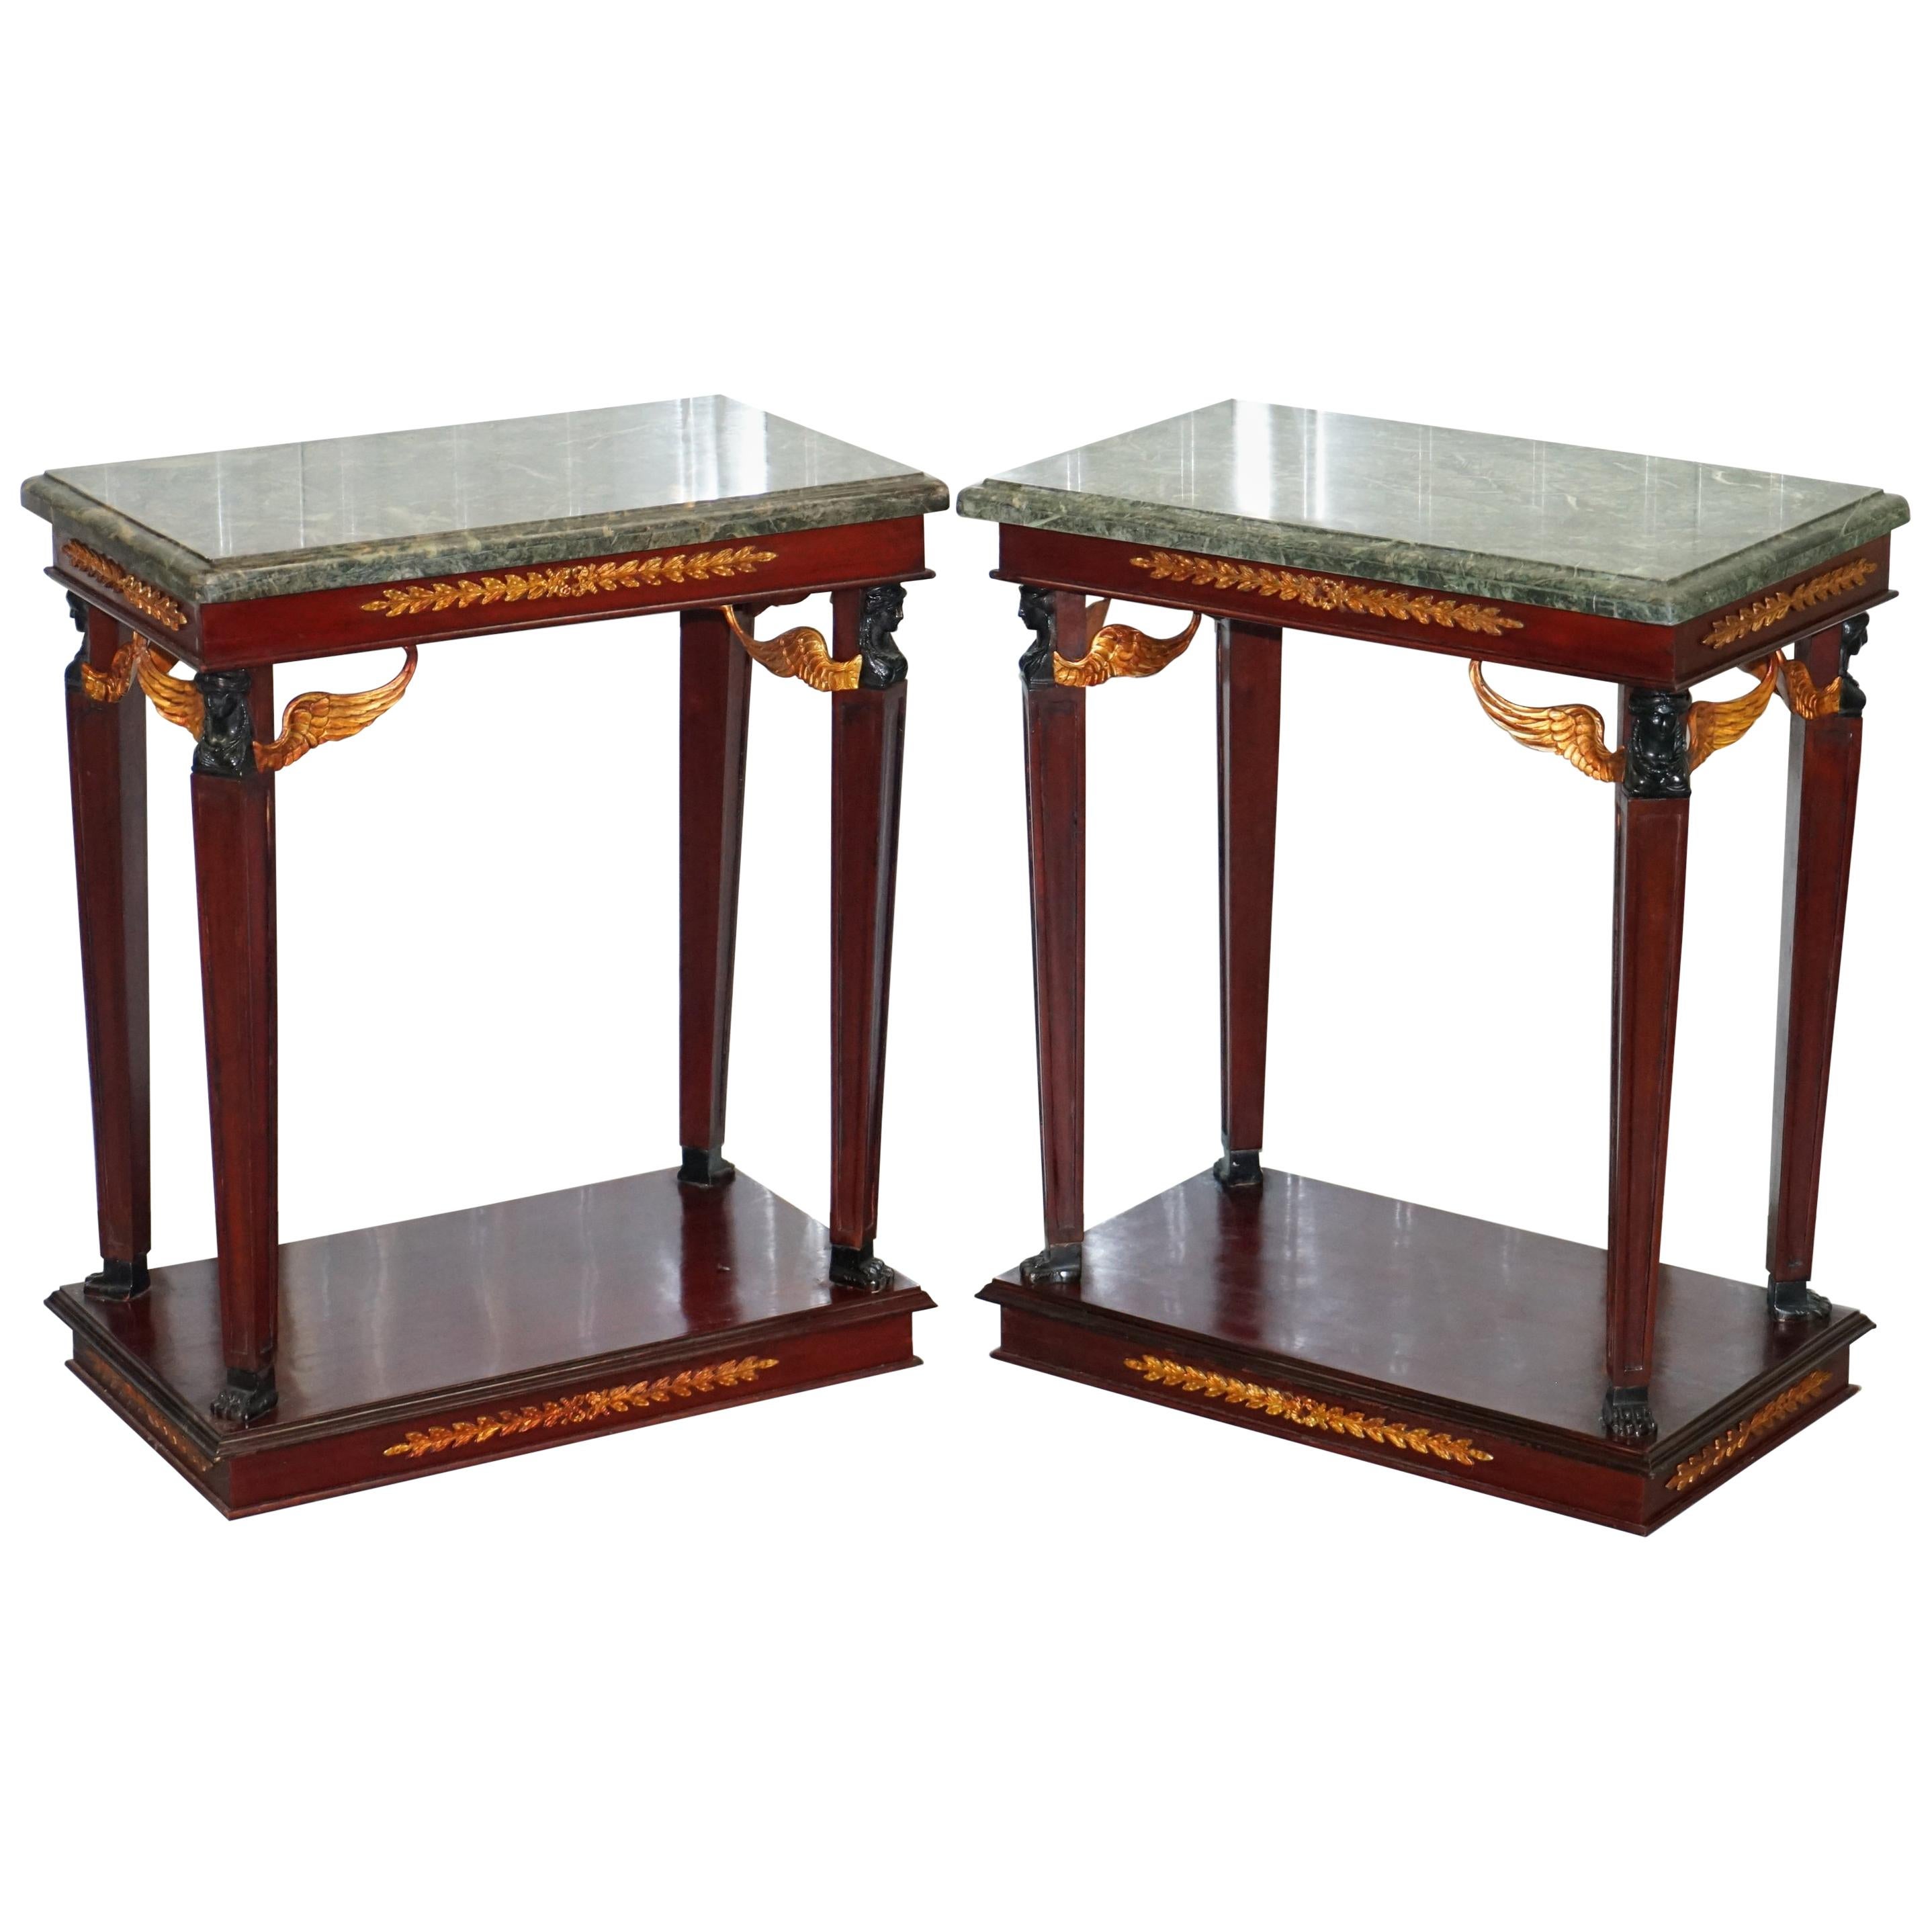 Matching Pair of French Empire Style Console Tables Solid Green Marble Tops